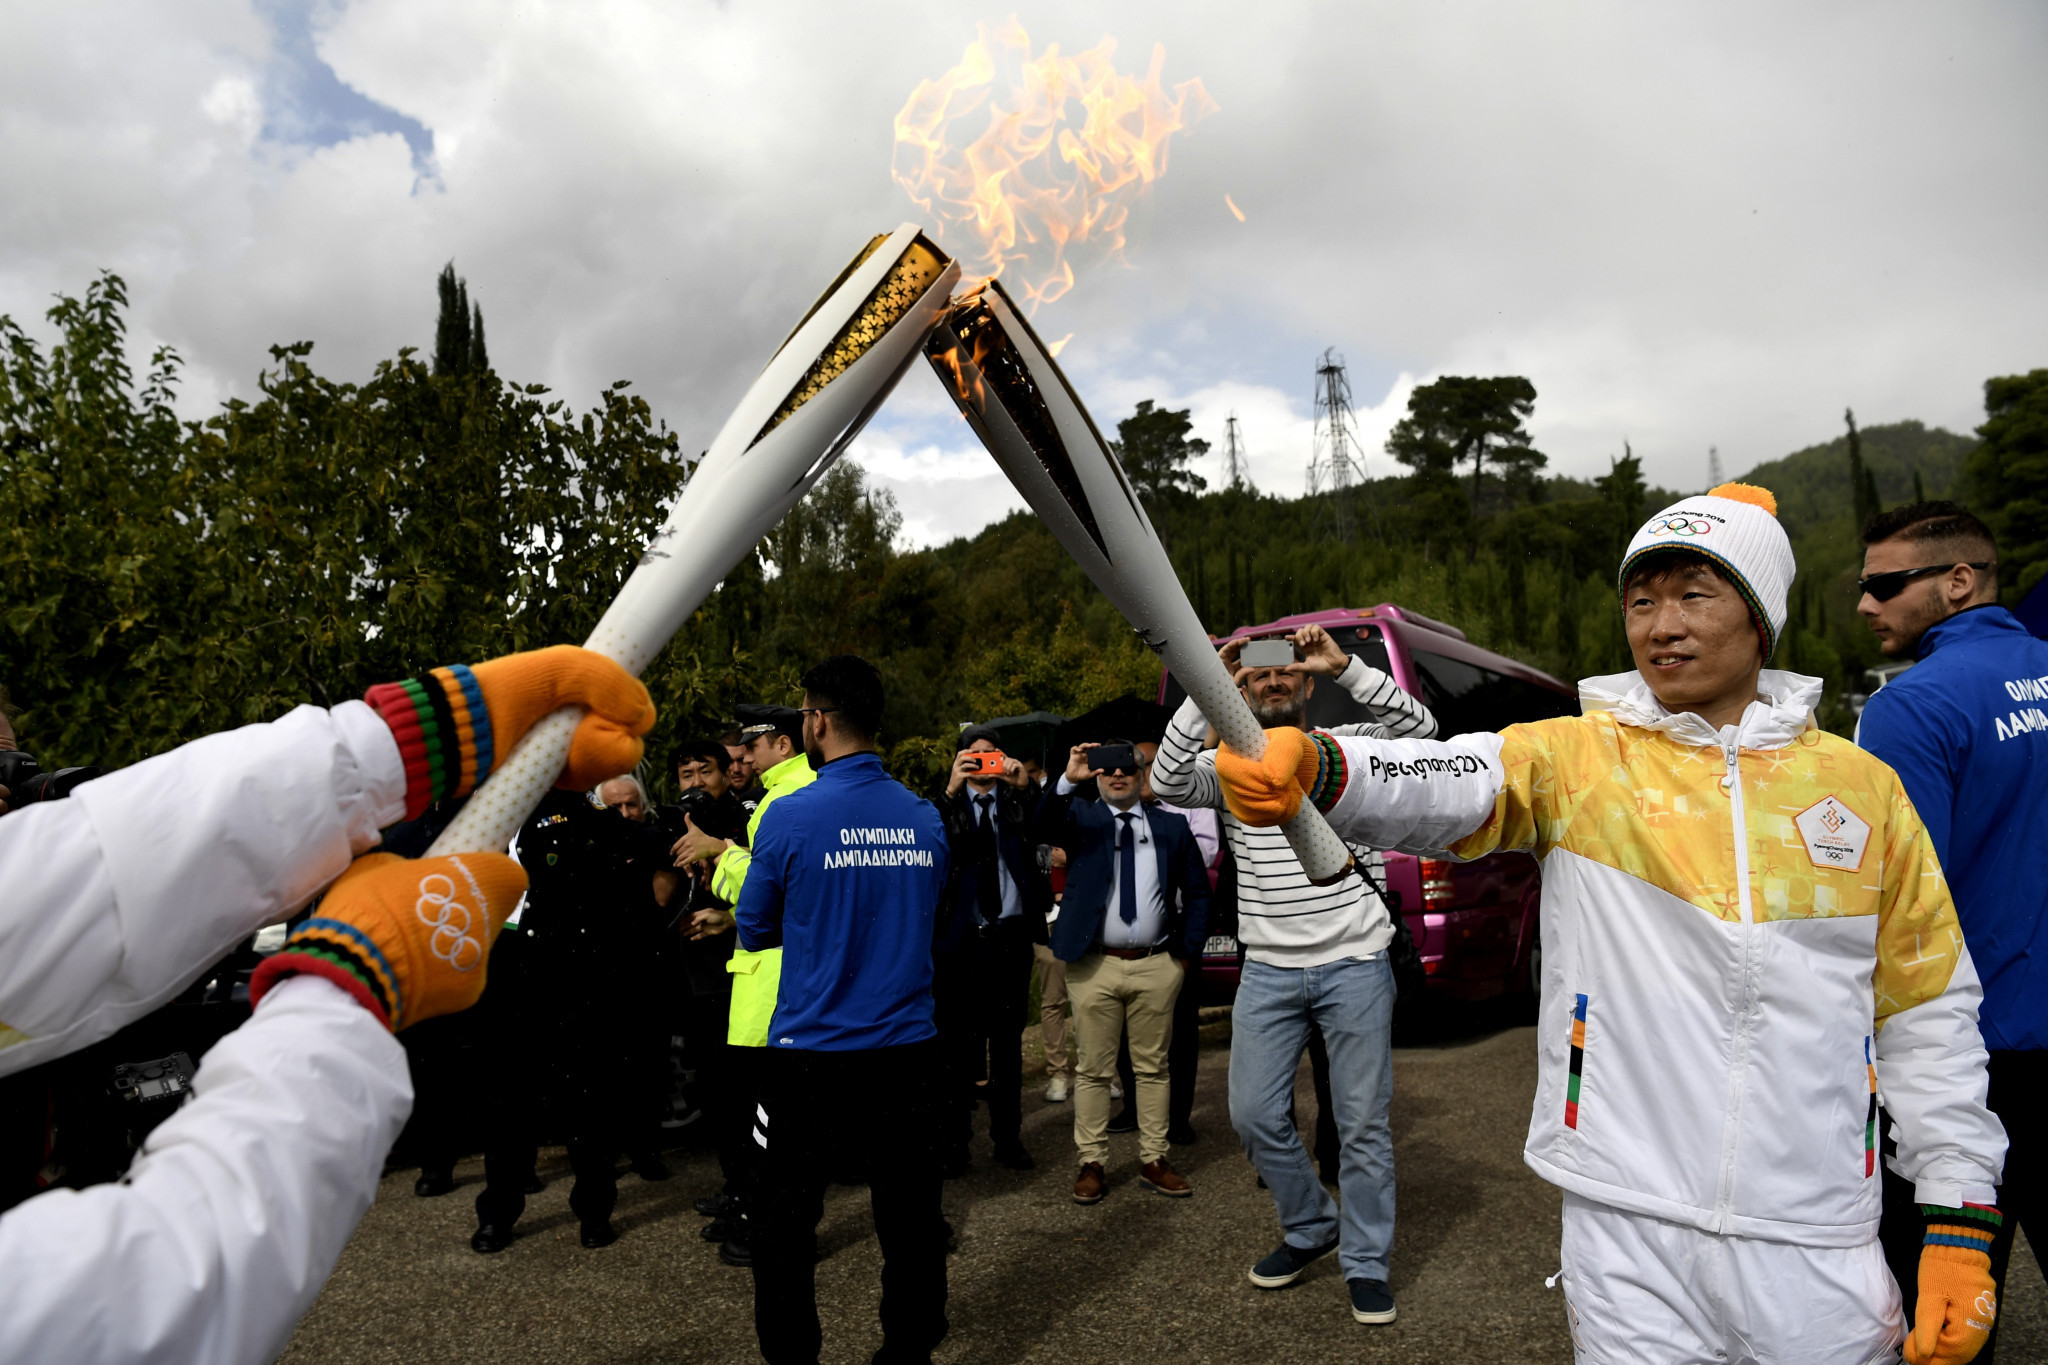 The Pyeongchang 2018 Olympic Torch lighting in Ancient Olympia was broadcast on the Channel ©Getty Images